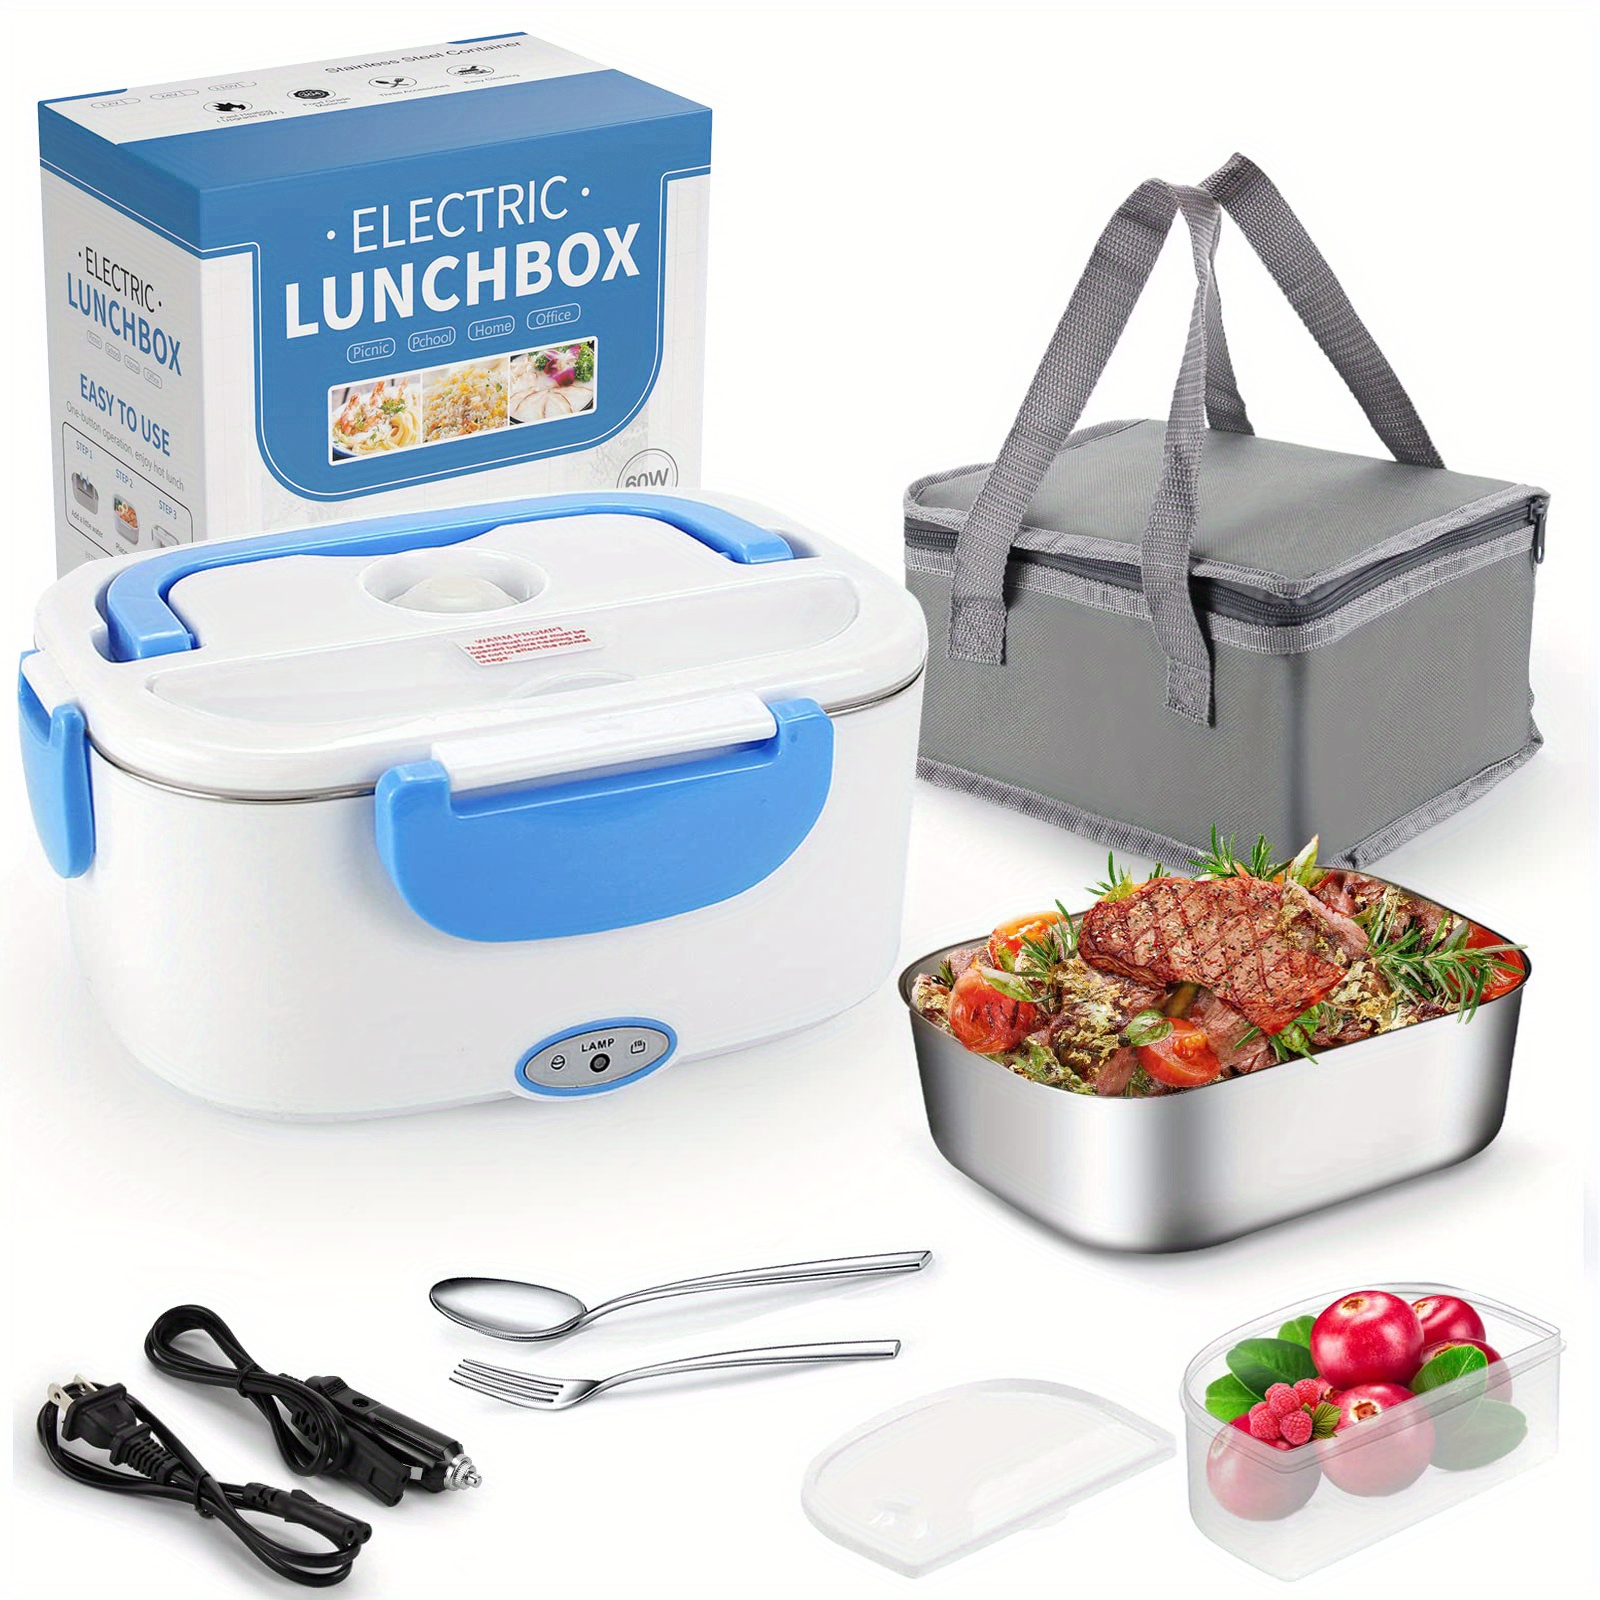 VECH Electric Heating Lunch Box Food Heater Portable Lunch Containers Warming Bento Box for Home & Office Use 110V Heat Up Lunch Box (Blue)